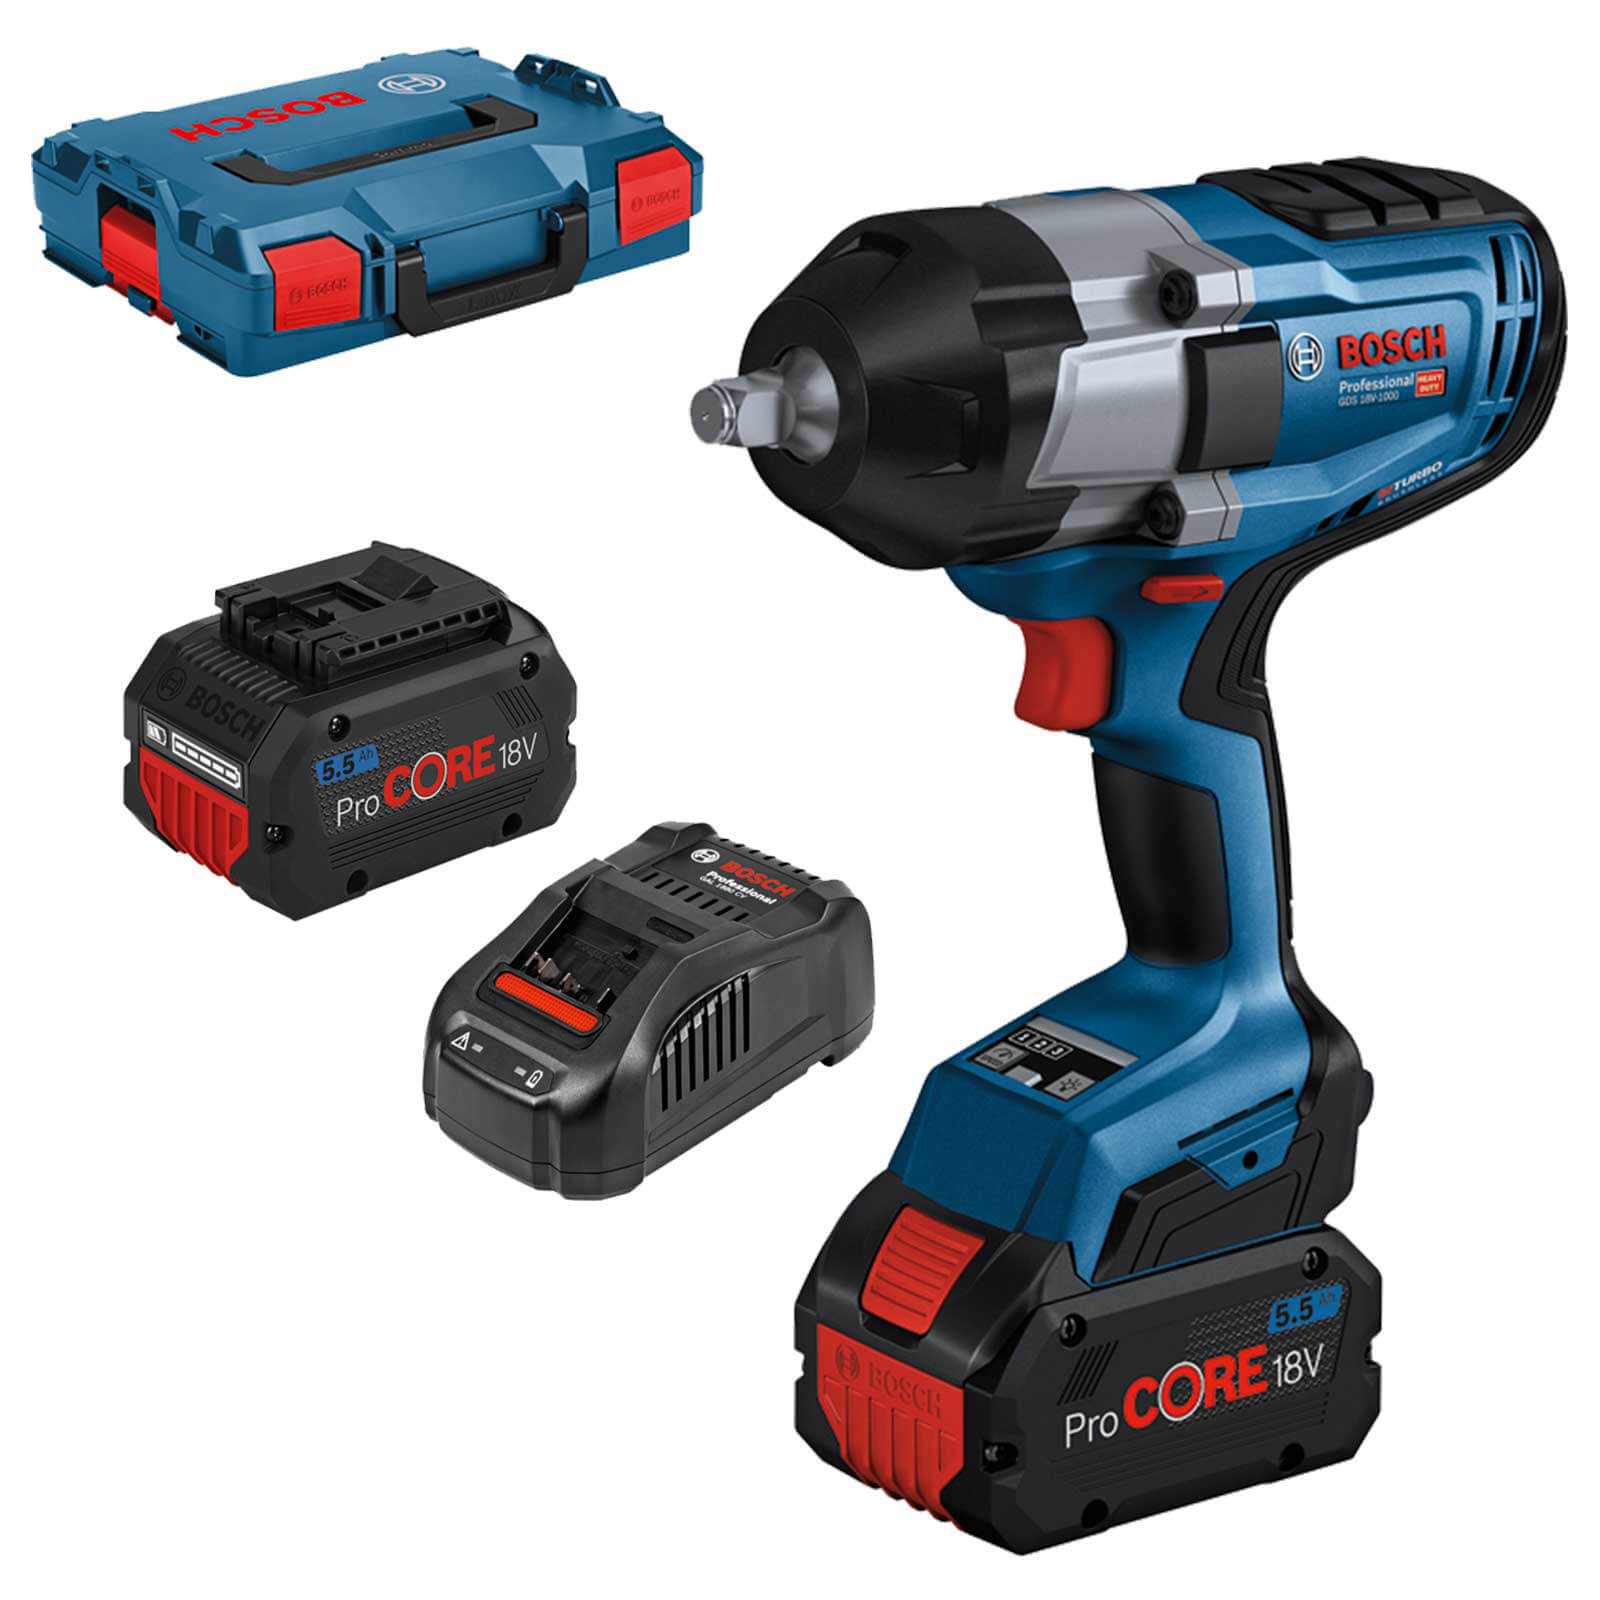 Image of Bosch GDS 18V-1000 BITURBO 18v Cordless Brushless High Torque ½” Drive Impact Wrench 2 x 5.5ah Li-ion ProCore Charger Case